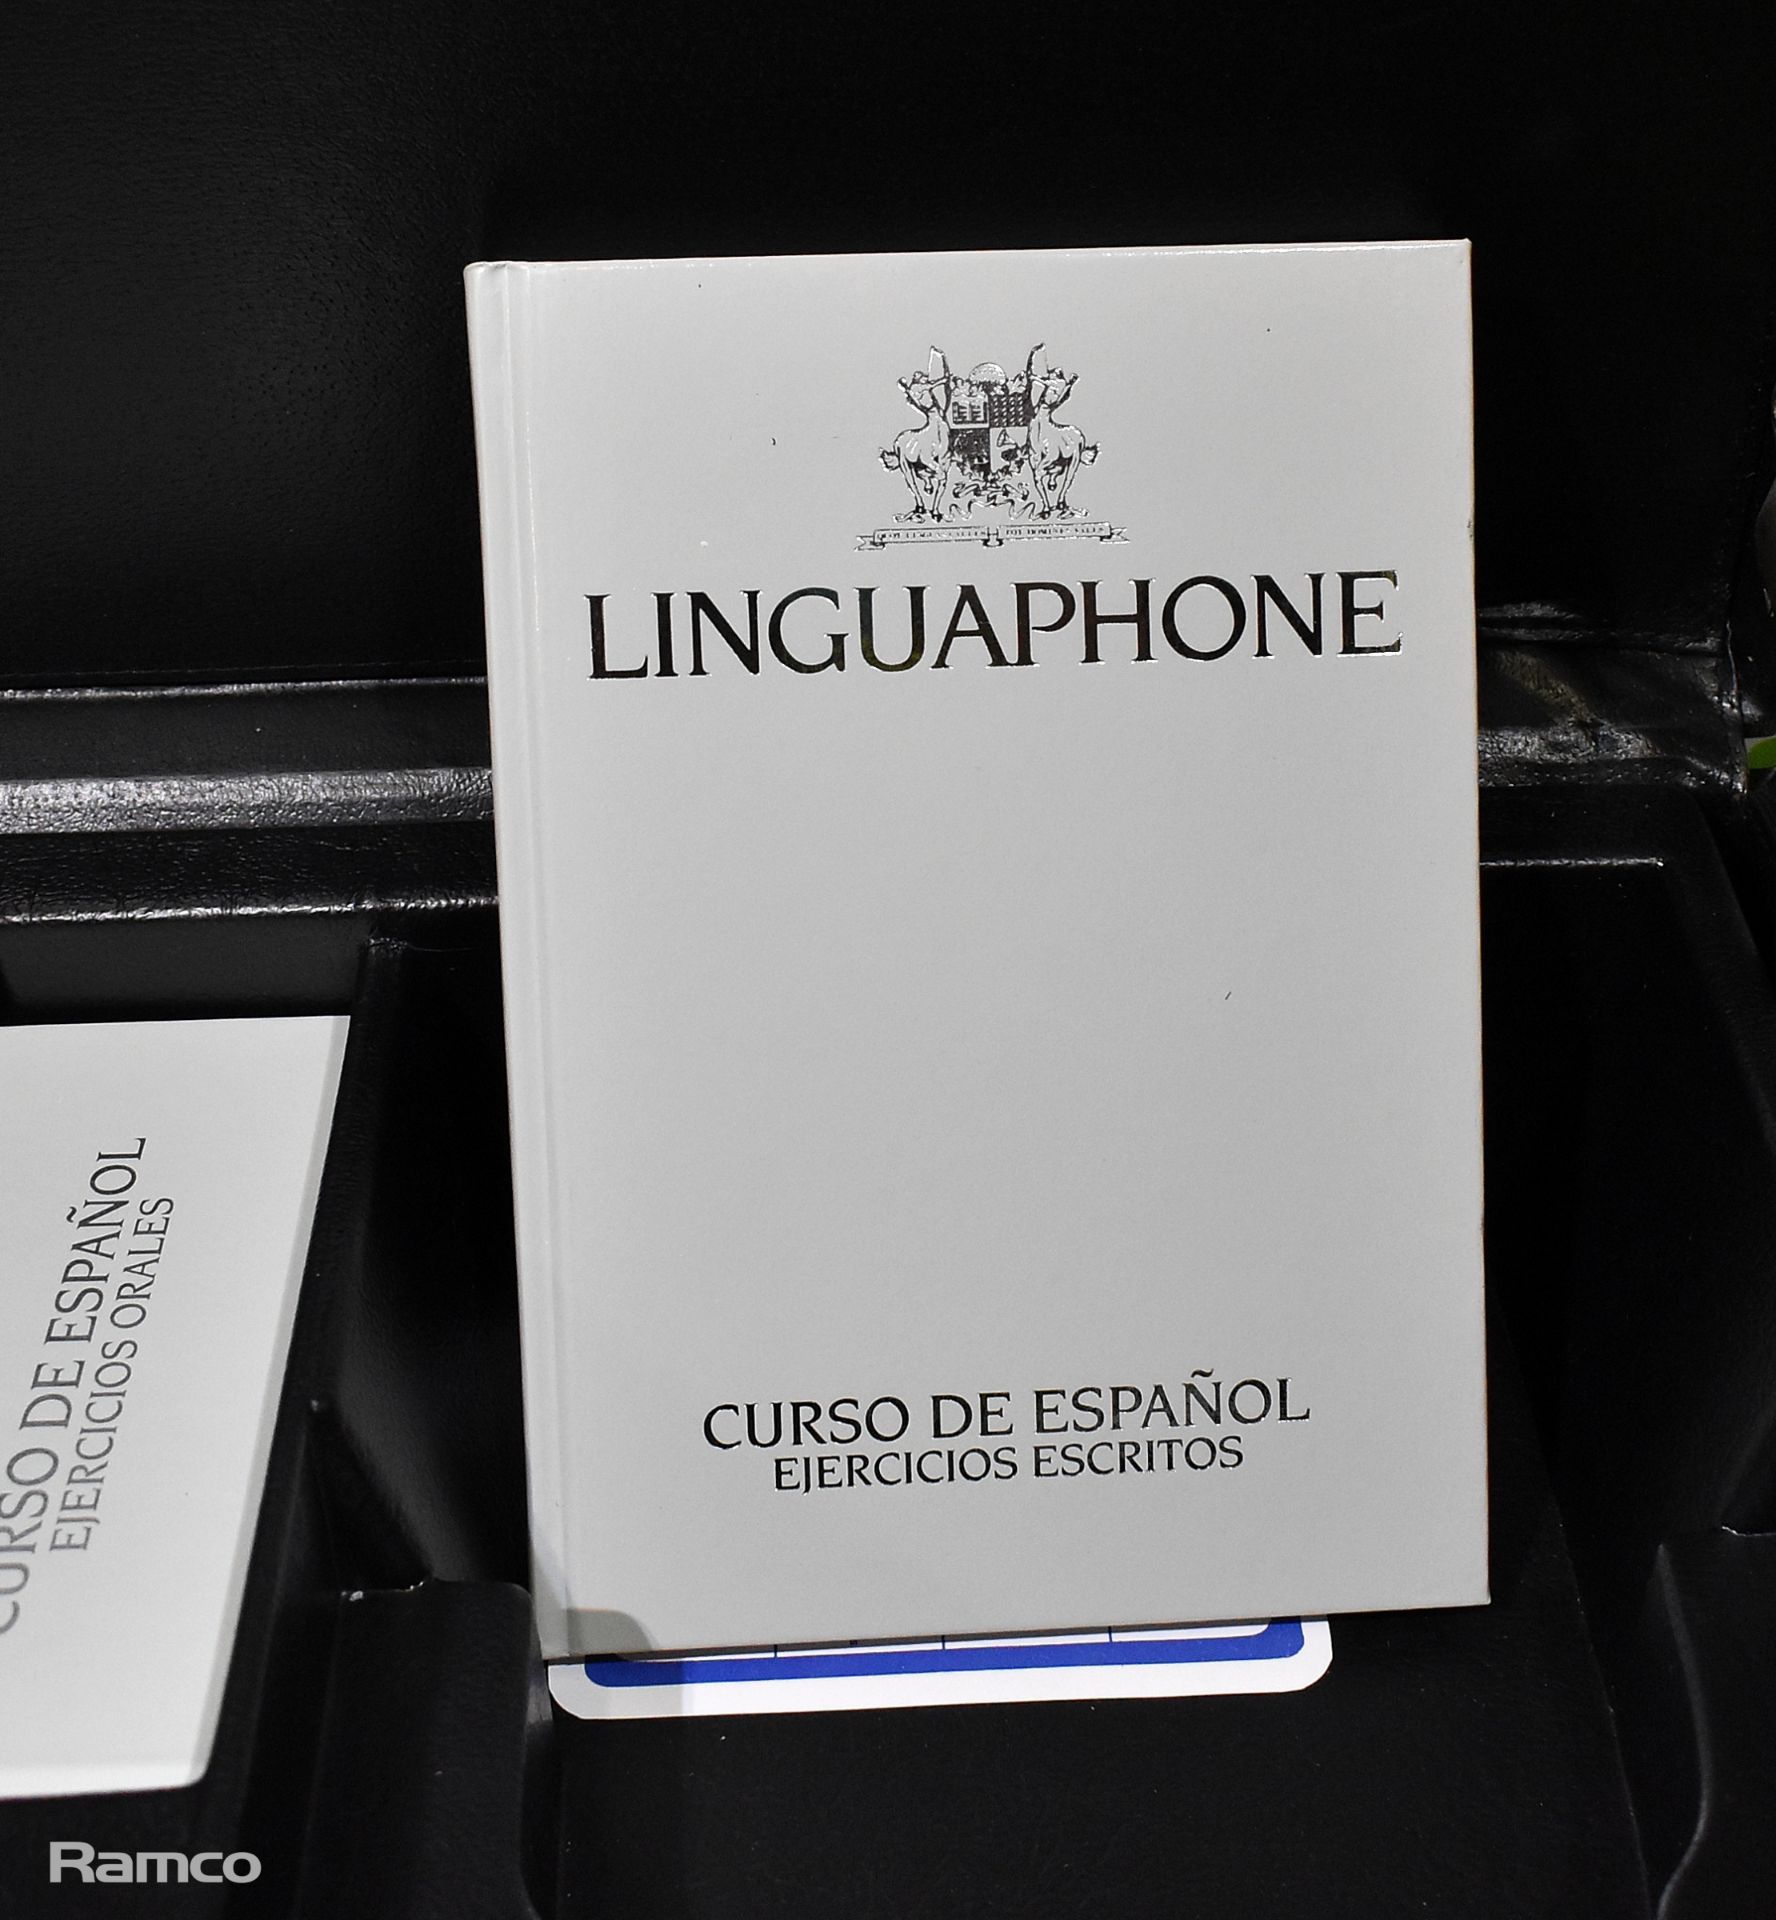 Linguaphone Spanish course in case - L 500 x W 410 x H 120mm - Image 3 of 6